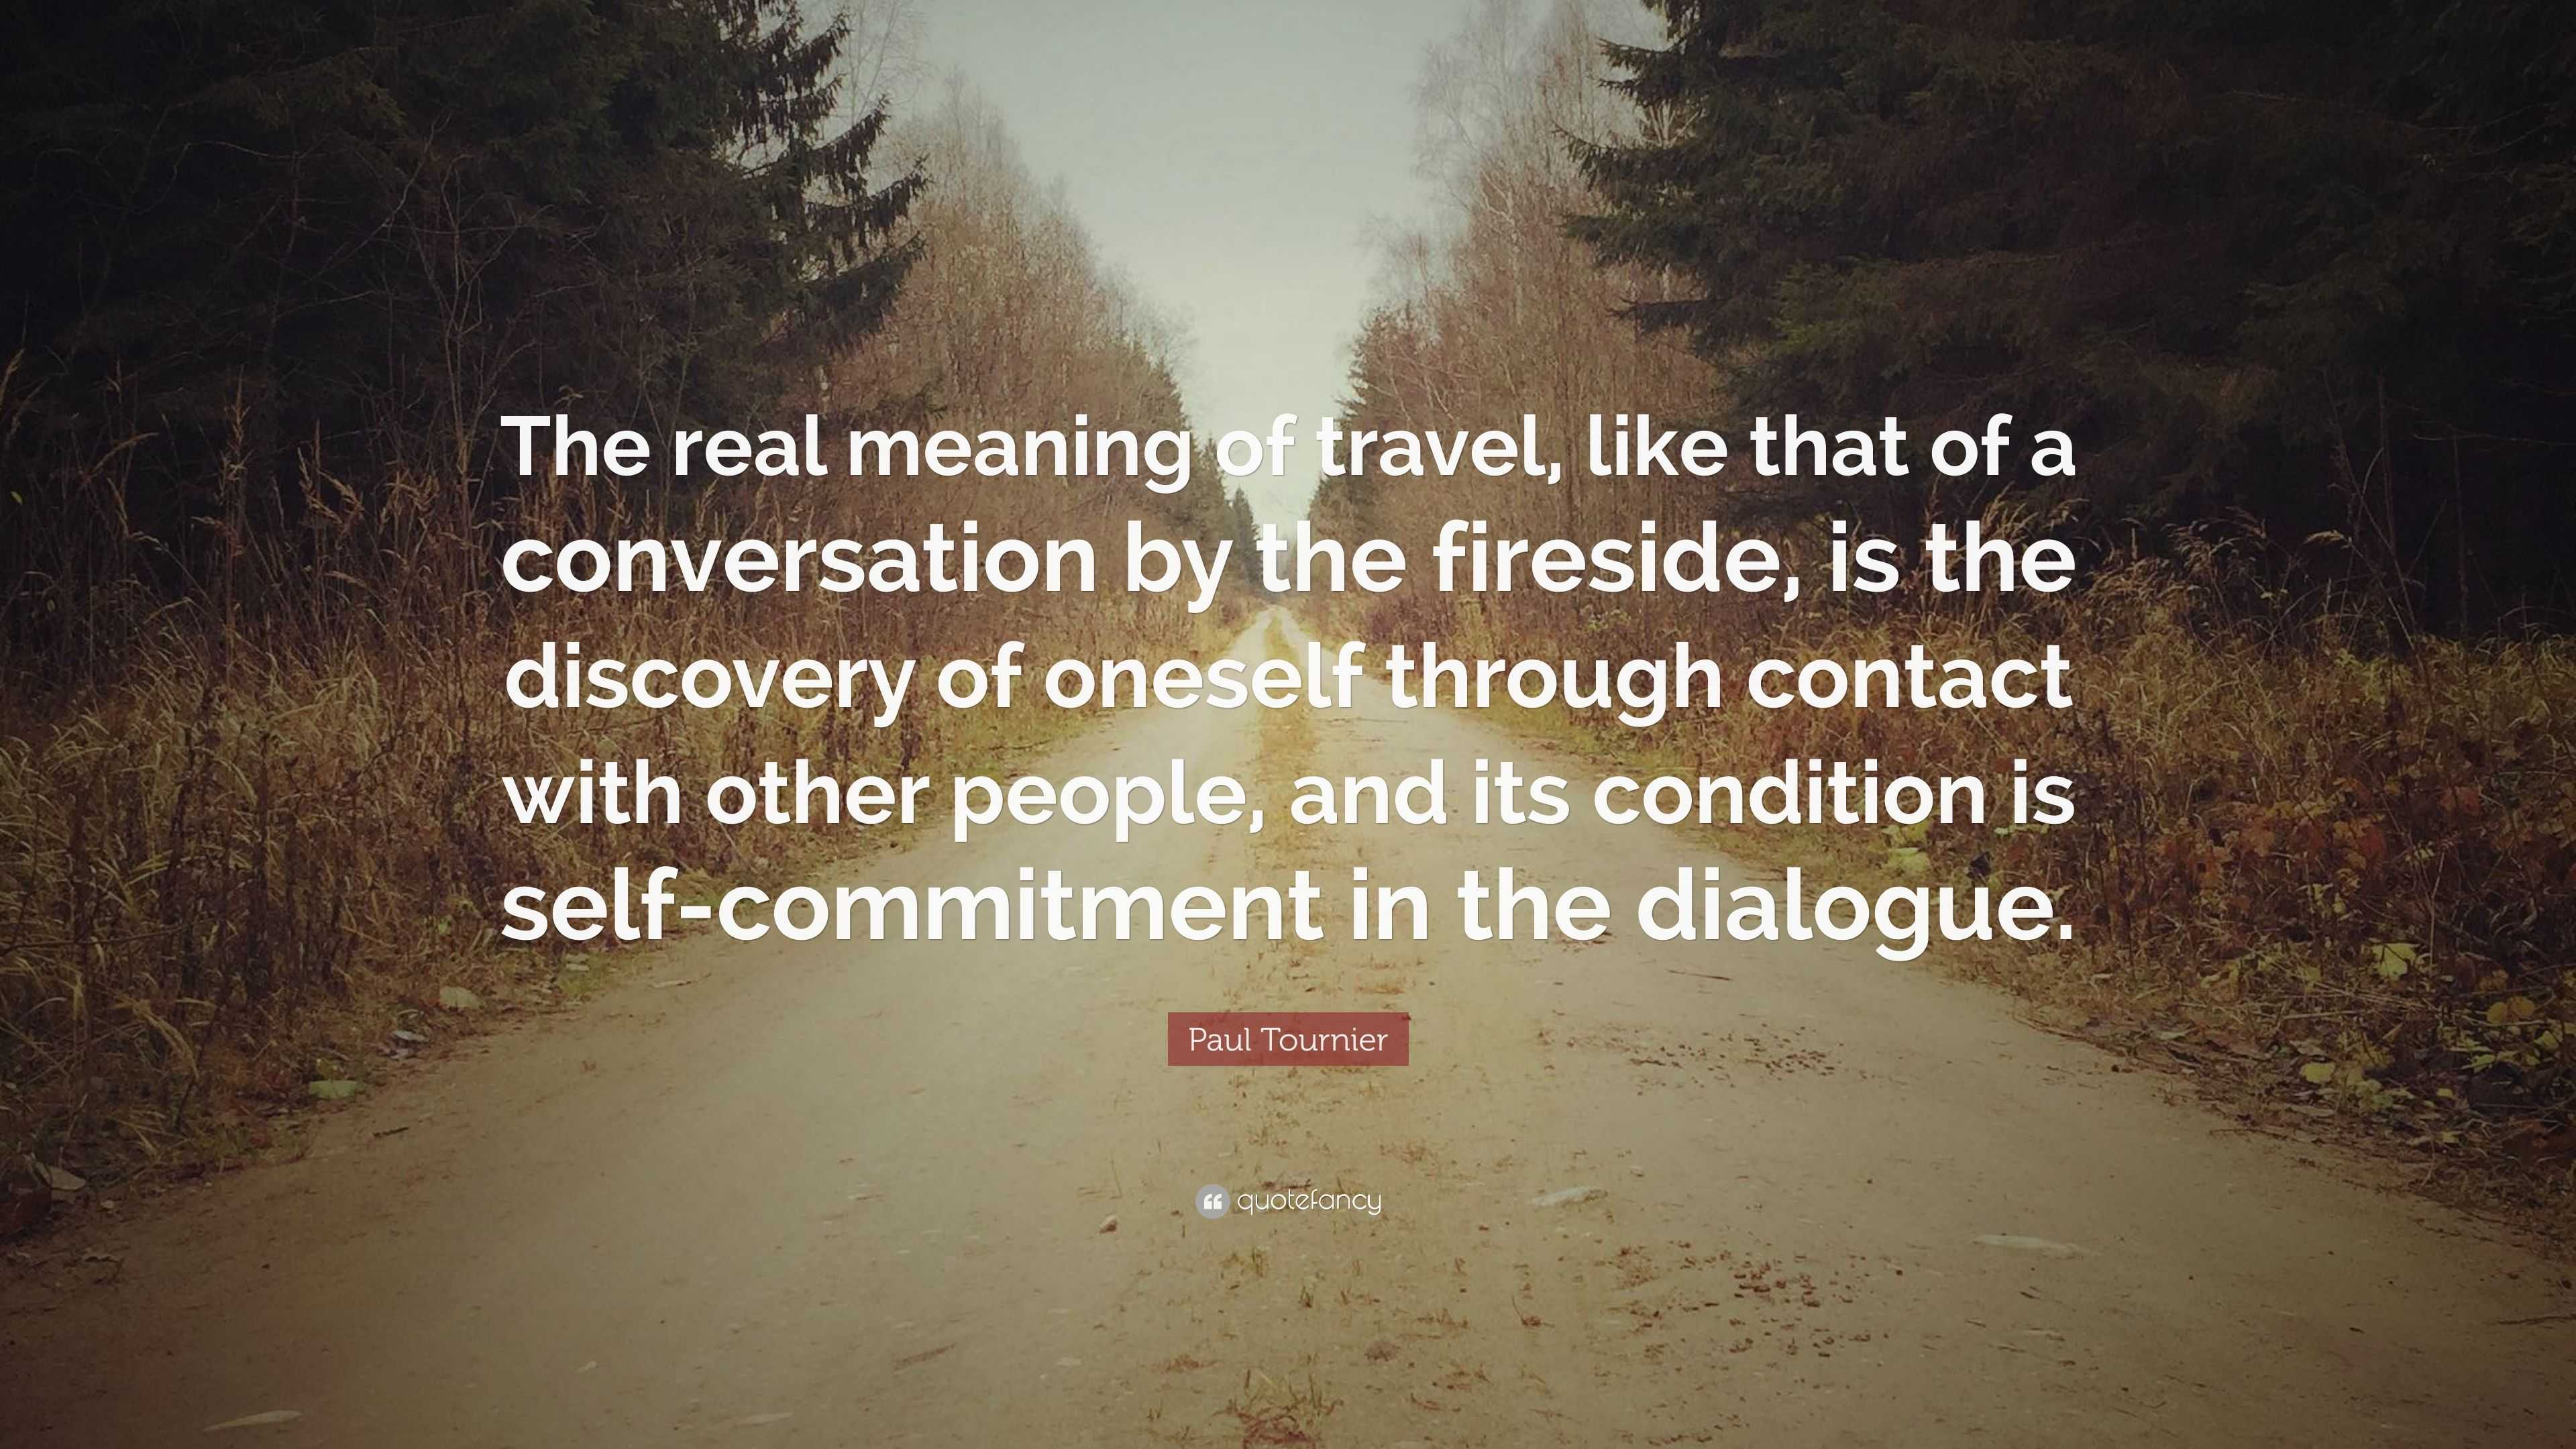 Paul Tournier Quote: “The real meaning of travel, like that of a ...